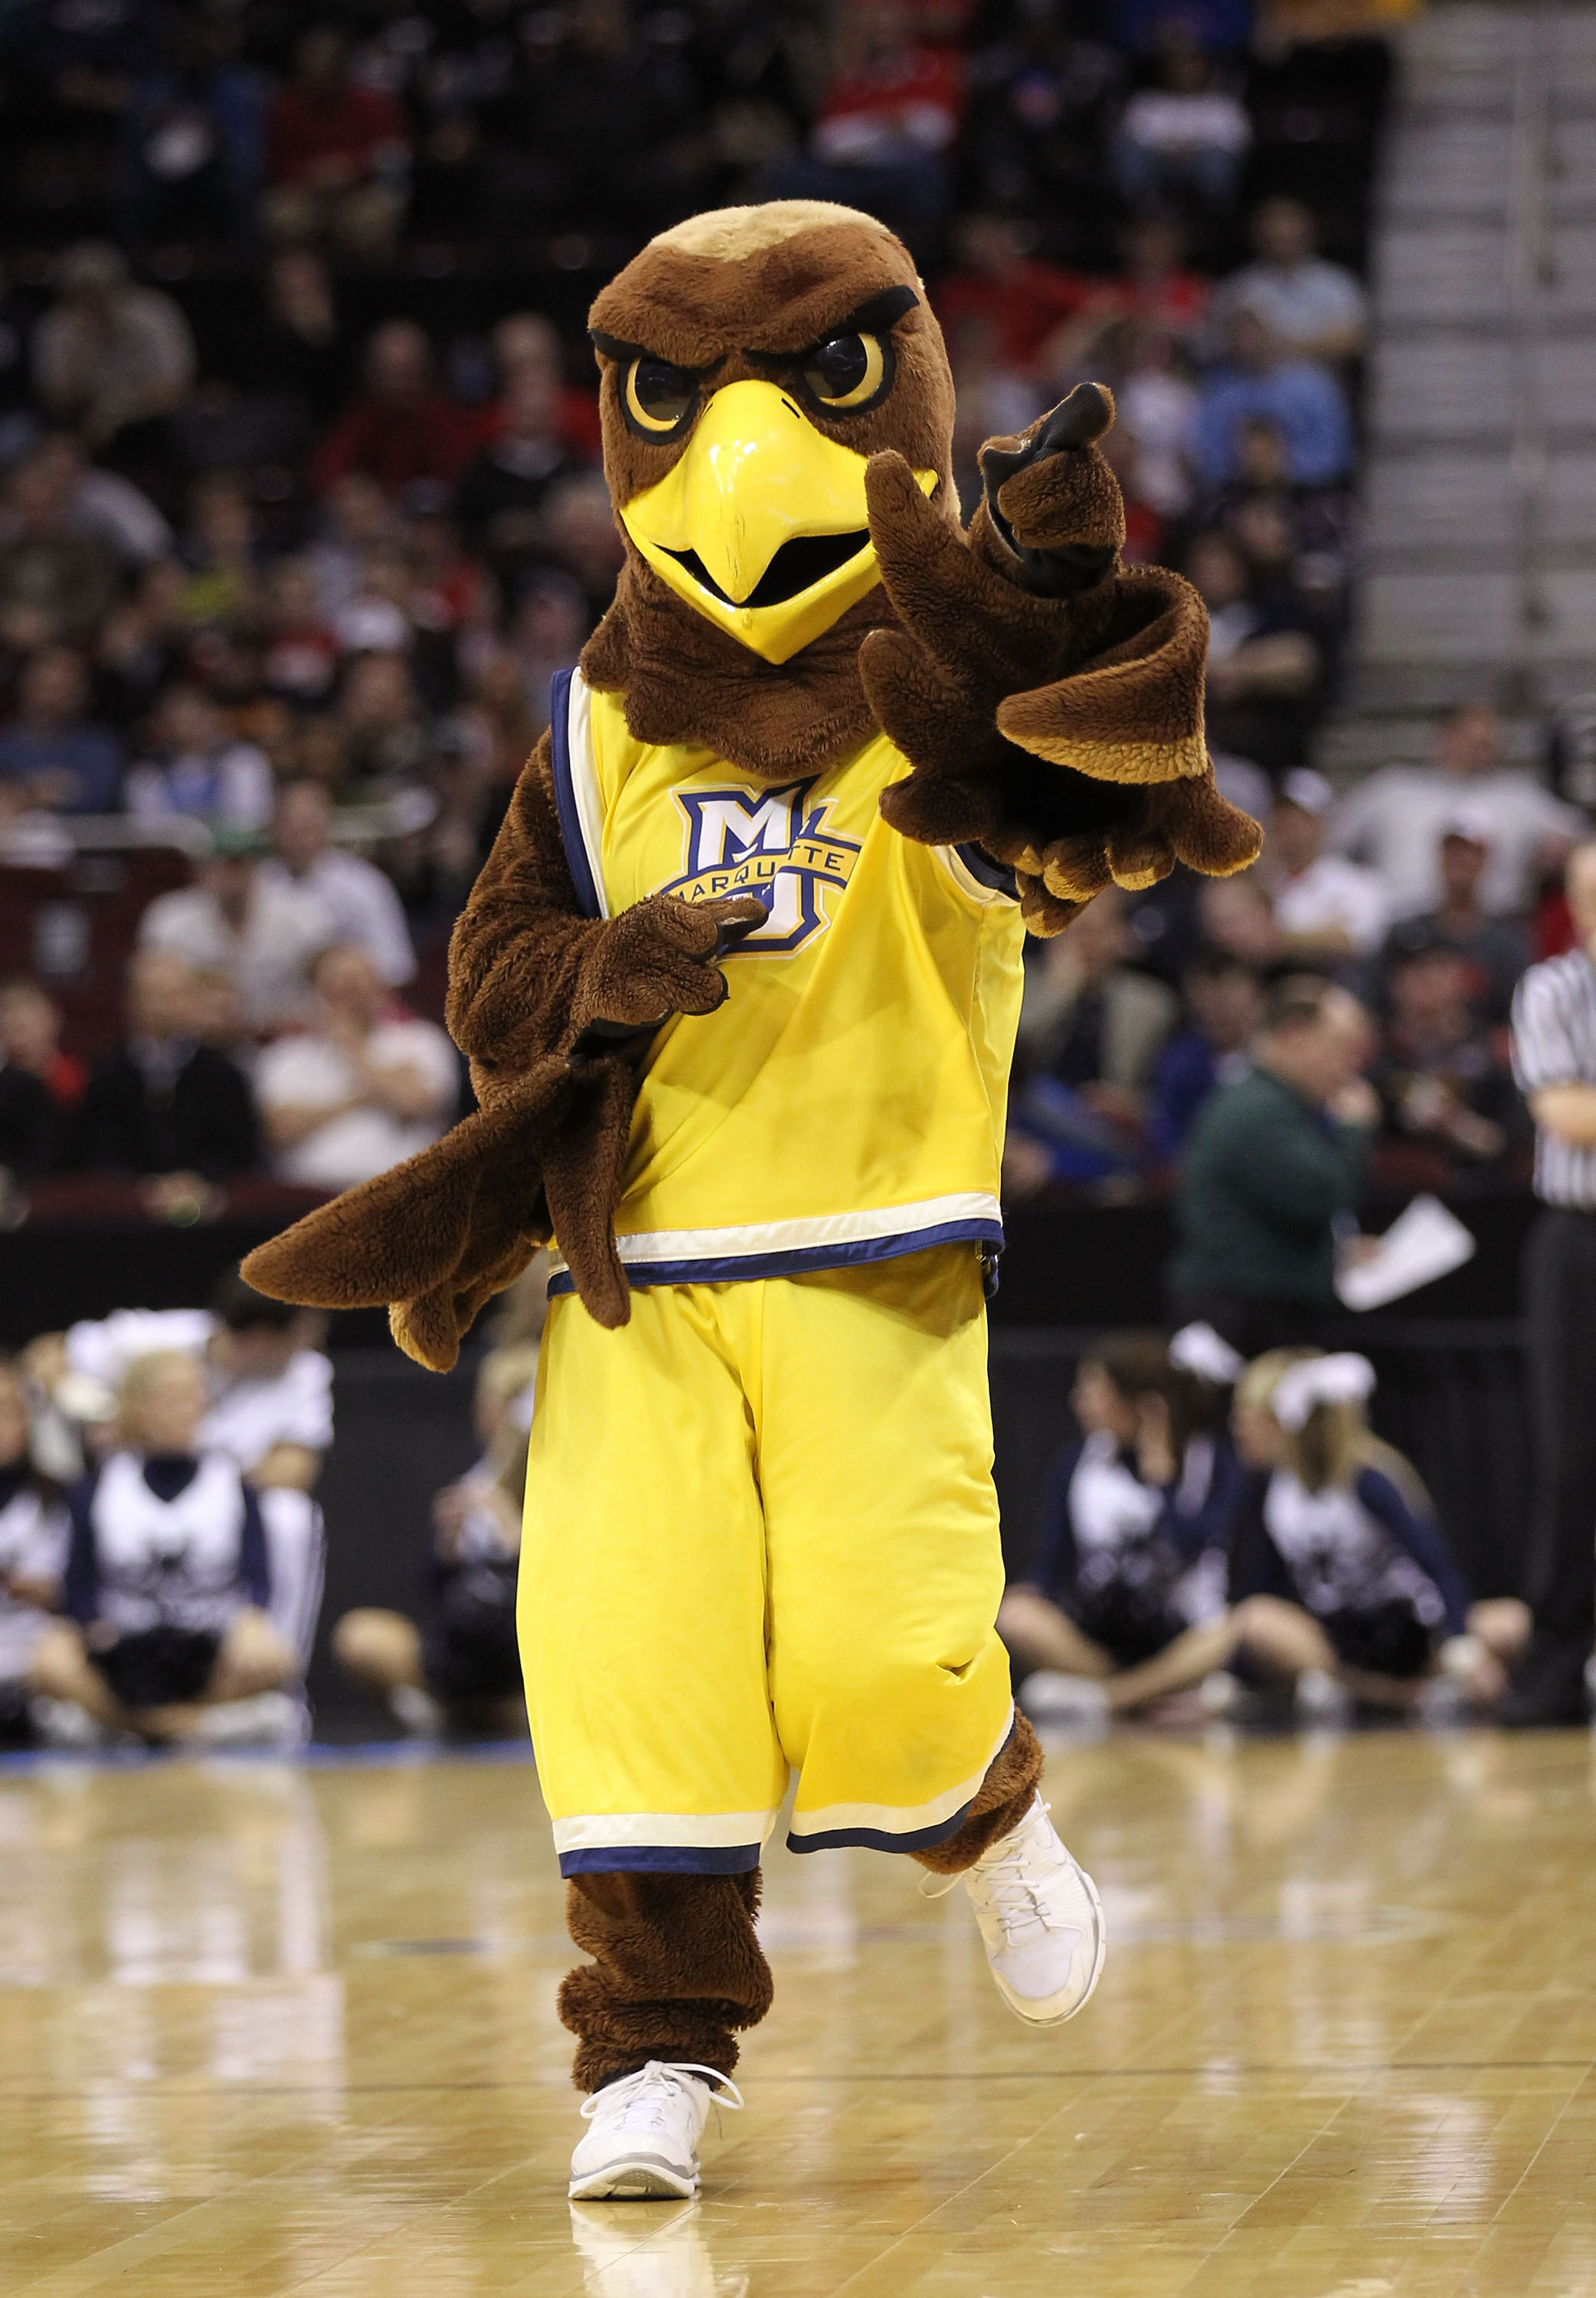 CLEVELAND, OH - MARCH 18: The Marquette Golden Eagles mascot walks on the court during the game against the Xavier Musketeers during the second round of the 2011 NCAA men's basketball tournament at Quicken Loans Arena on March 18, 2011 in Cleveland, Ohio.